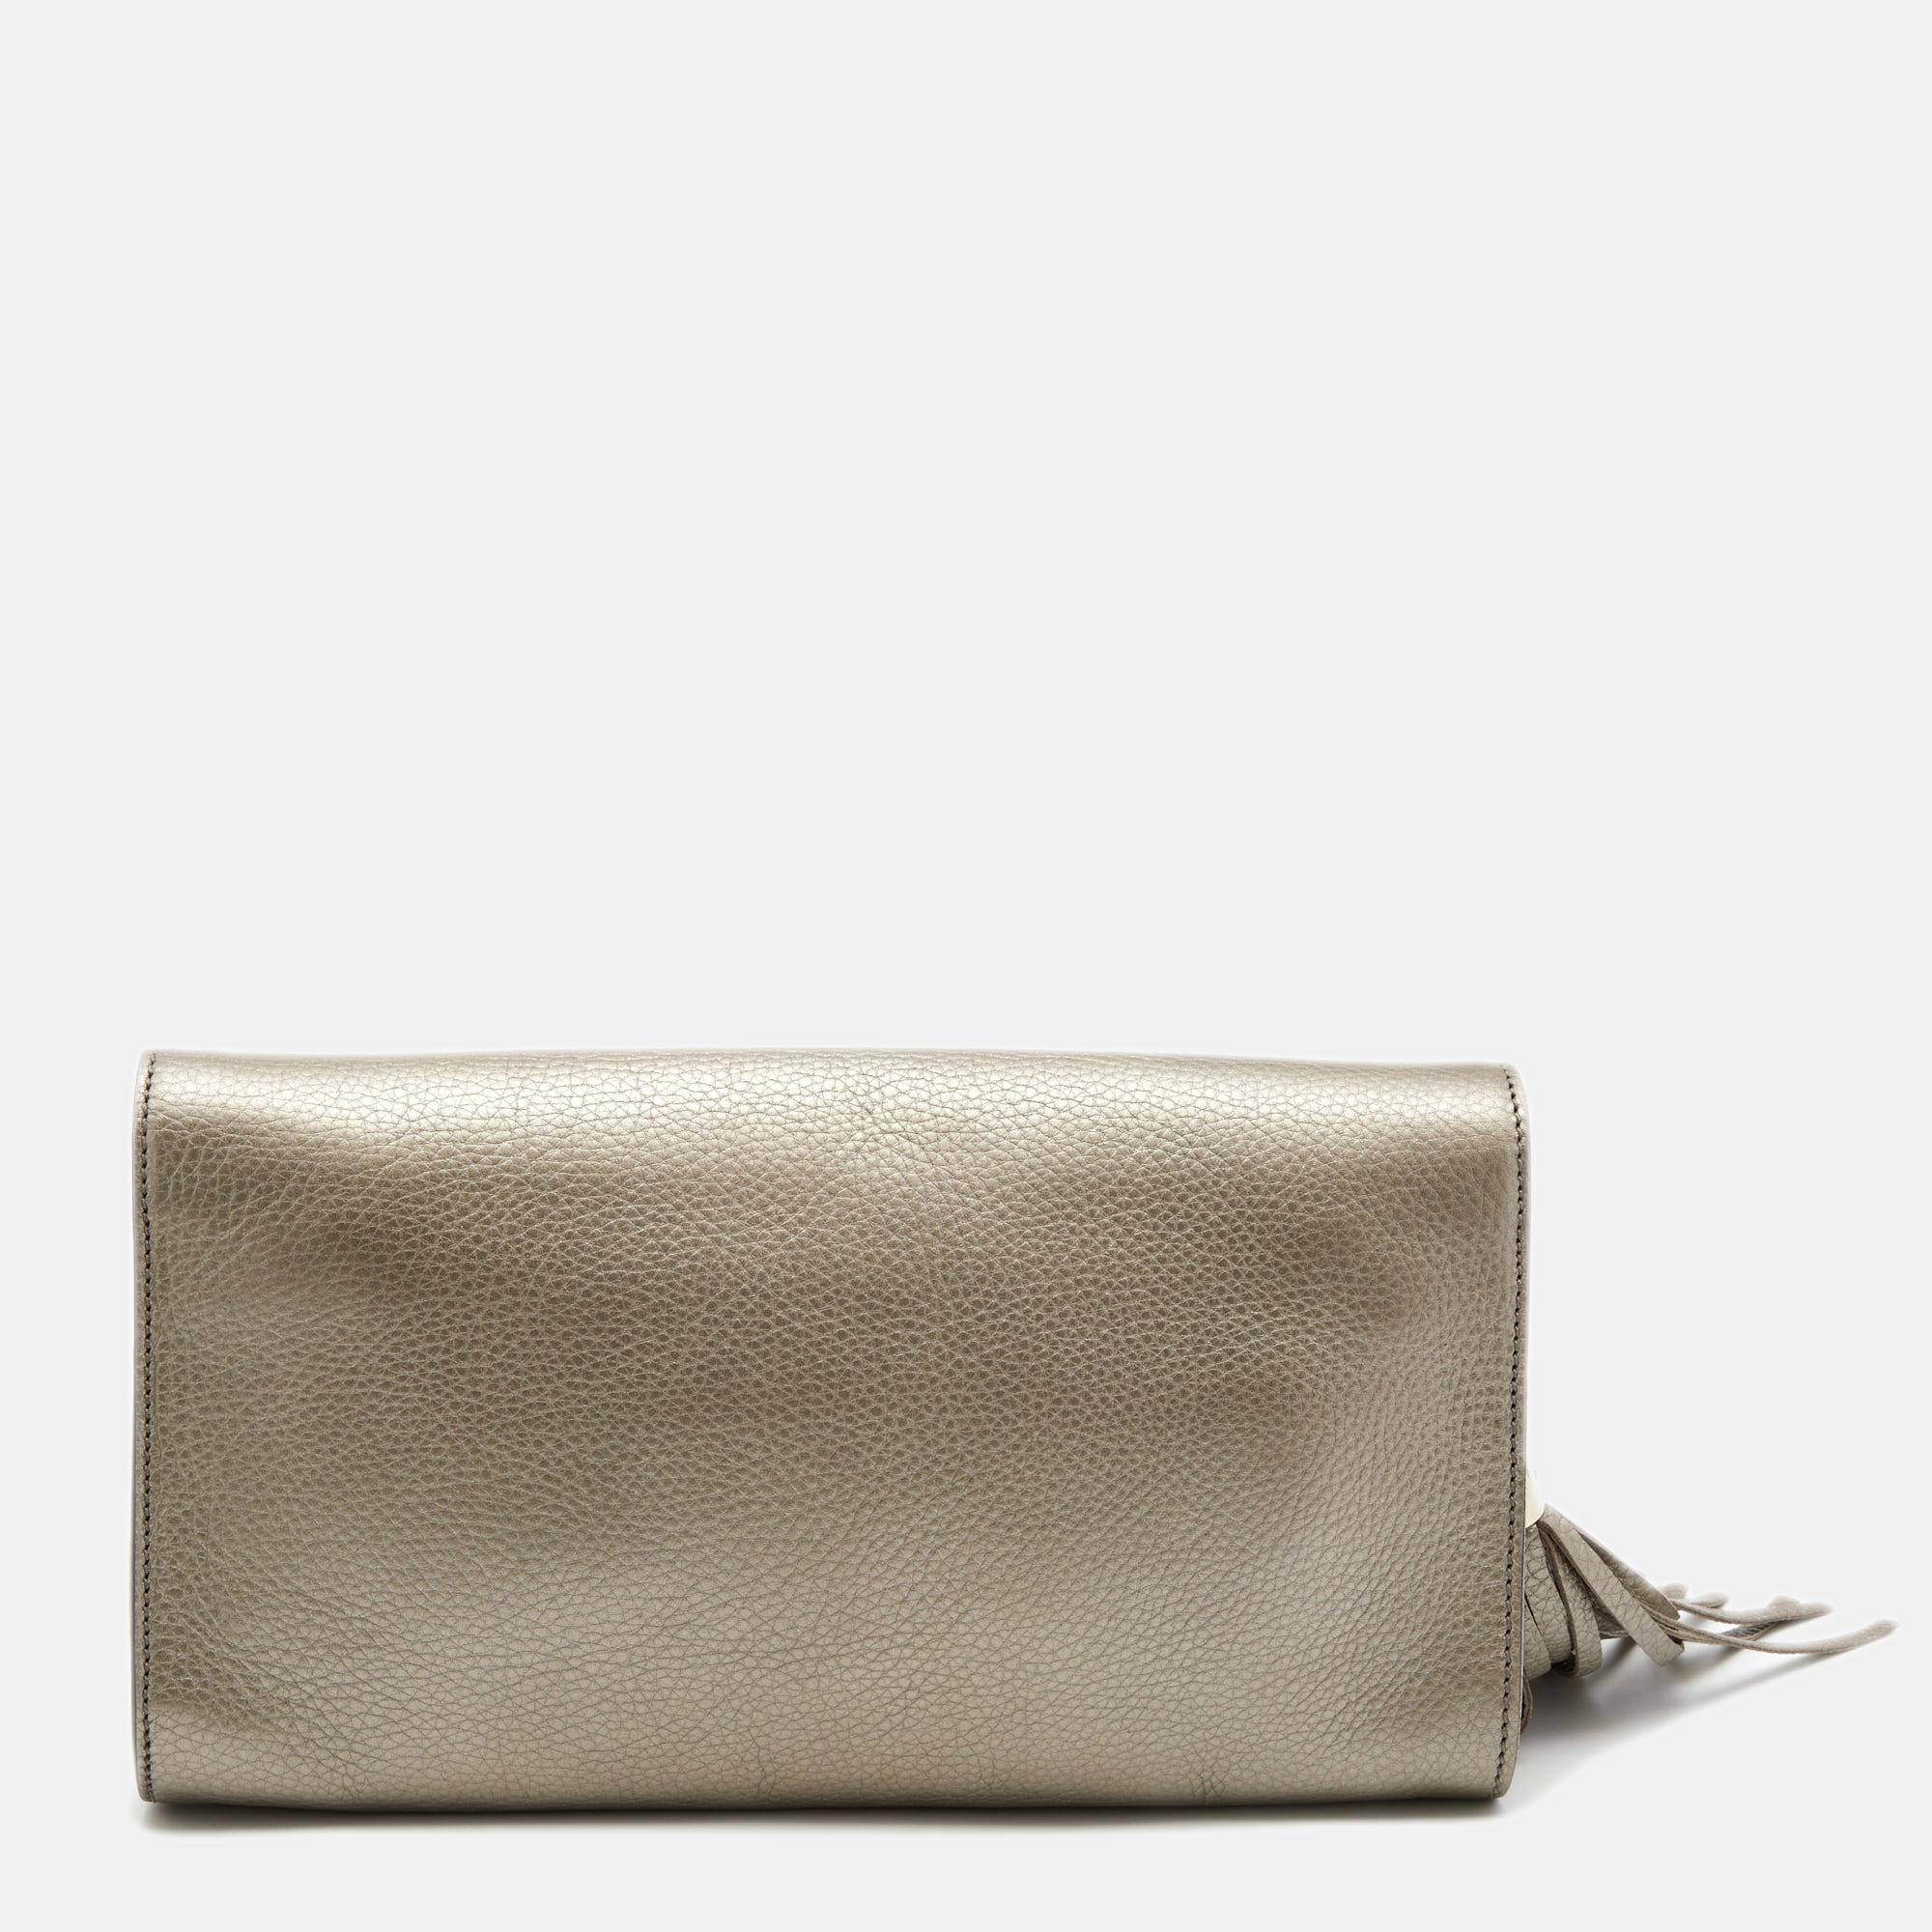 Gucci's expertise in creating noteworthy designs is evident in this Soho clutch. It gets a luxe update with a brand motif on the front and a tassel charm on the side. Lined with canvas, it can neatly house your day or evening essentials.

Includes: